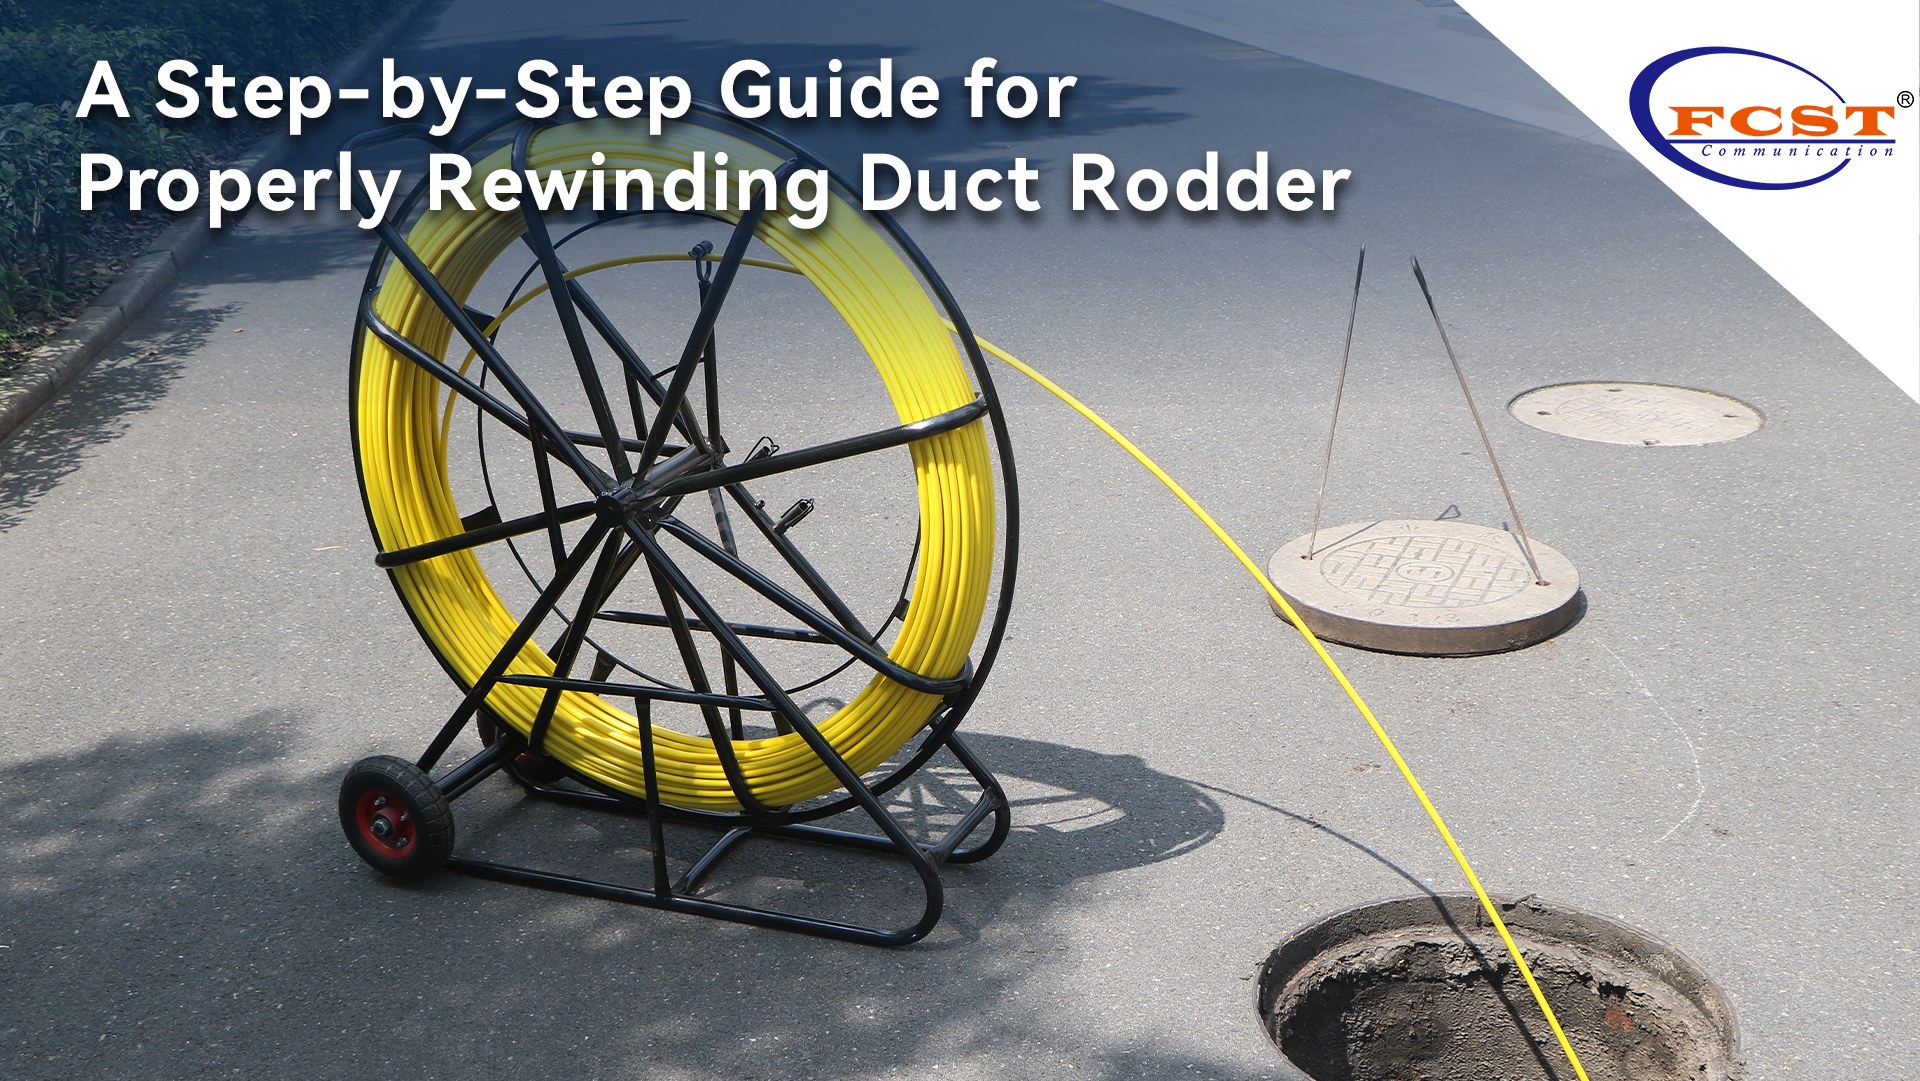 A Step-by-Step Guide for Properly Rewinding Duct Rodder